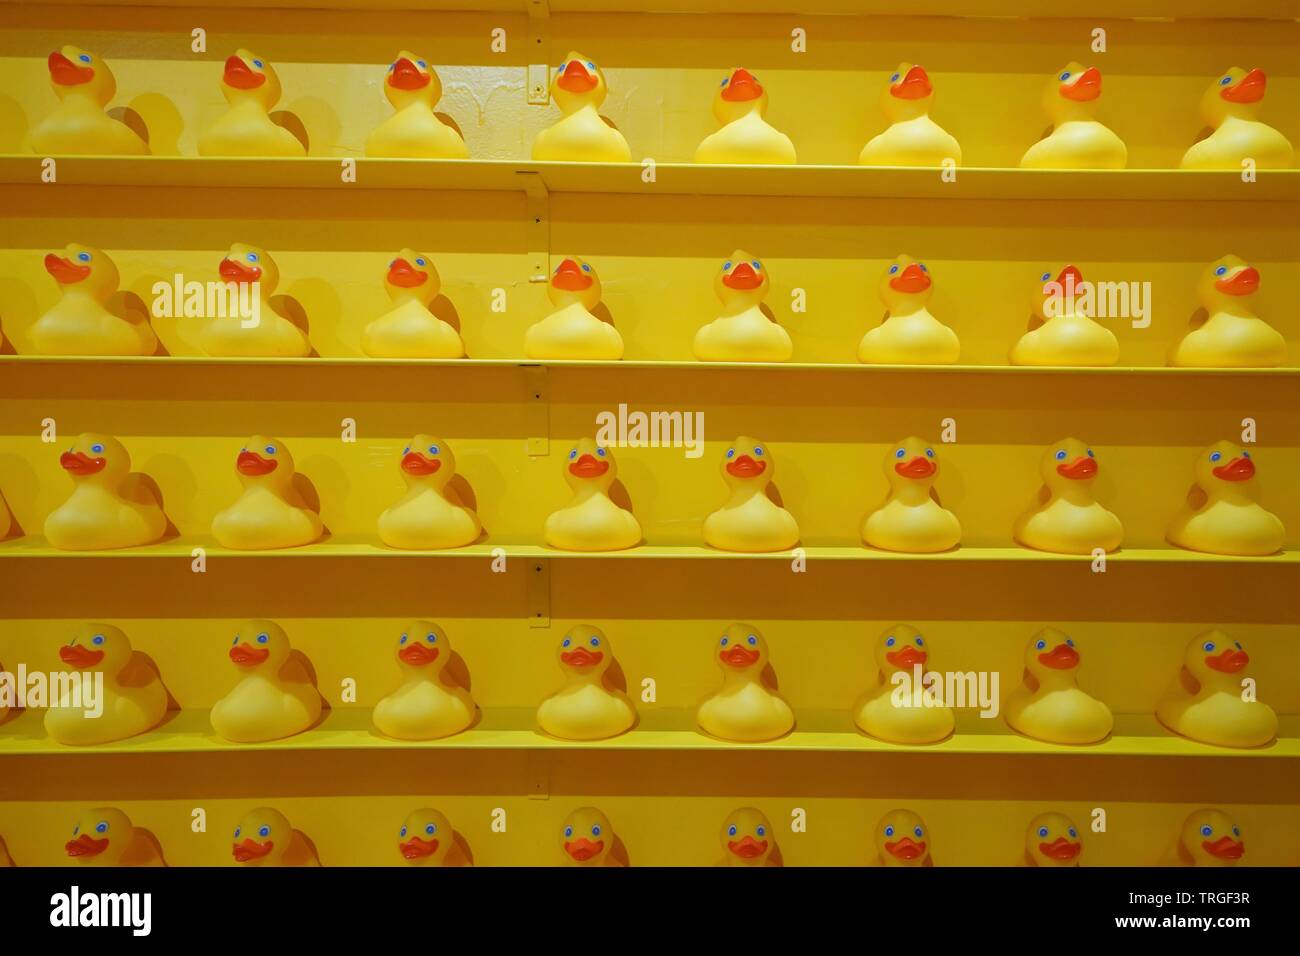 Rows of yellow rubber ducks on a wall. Stock Photo